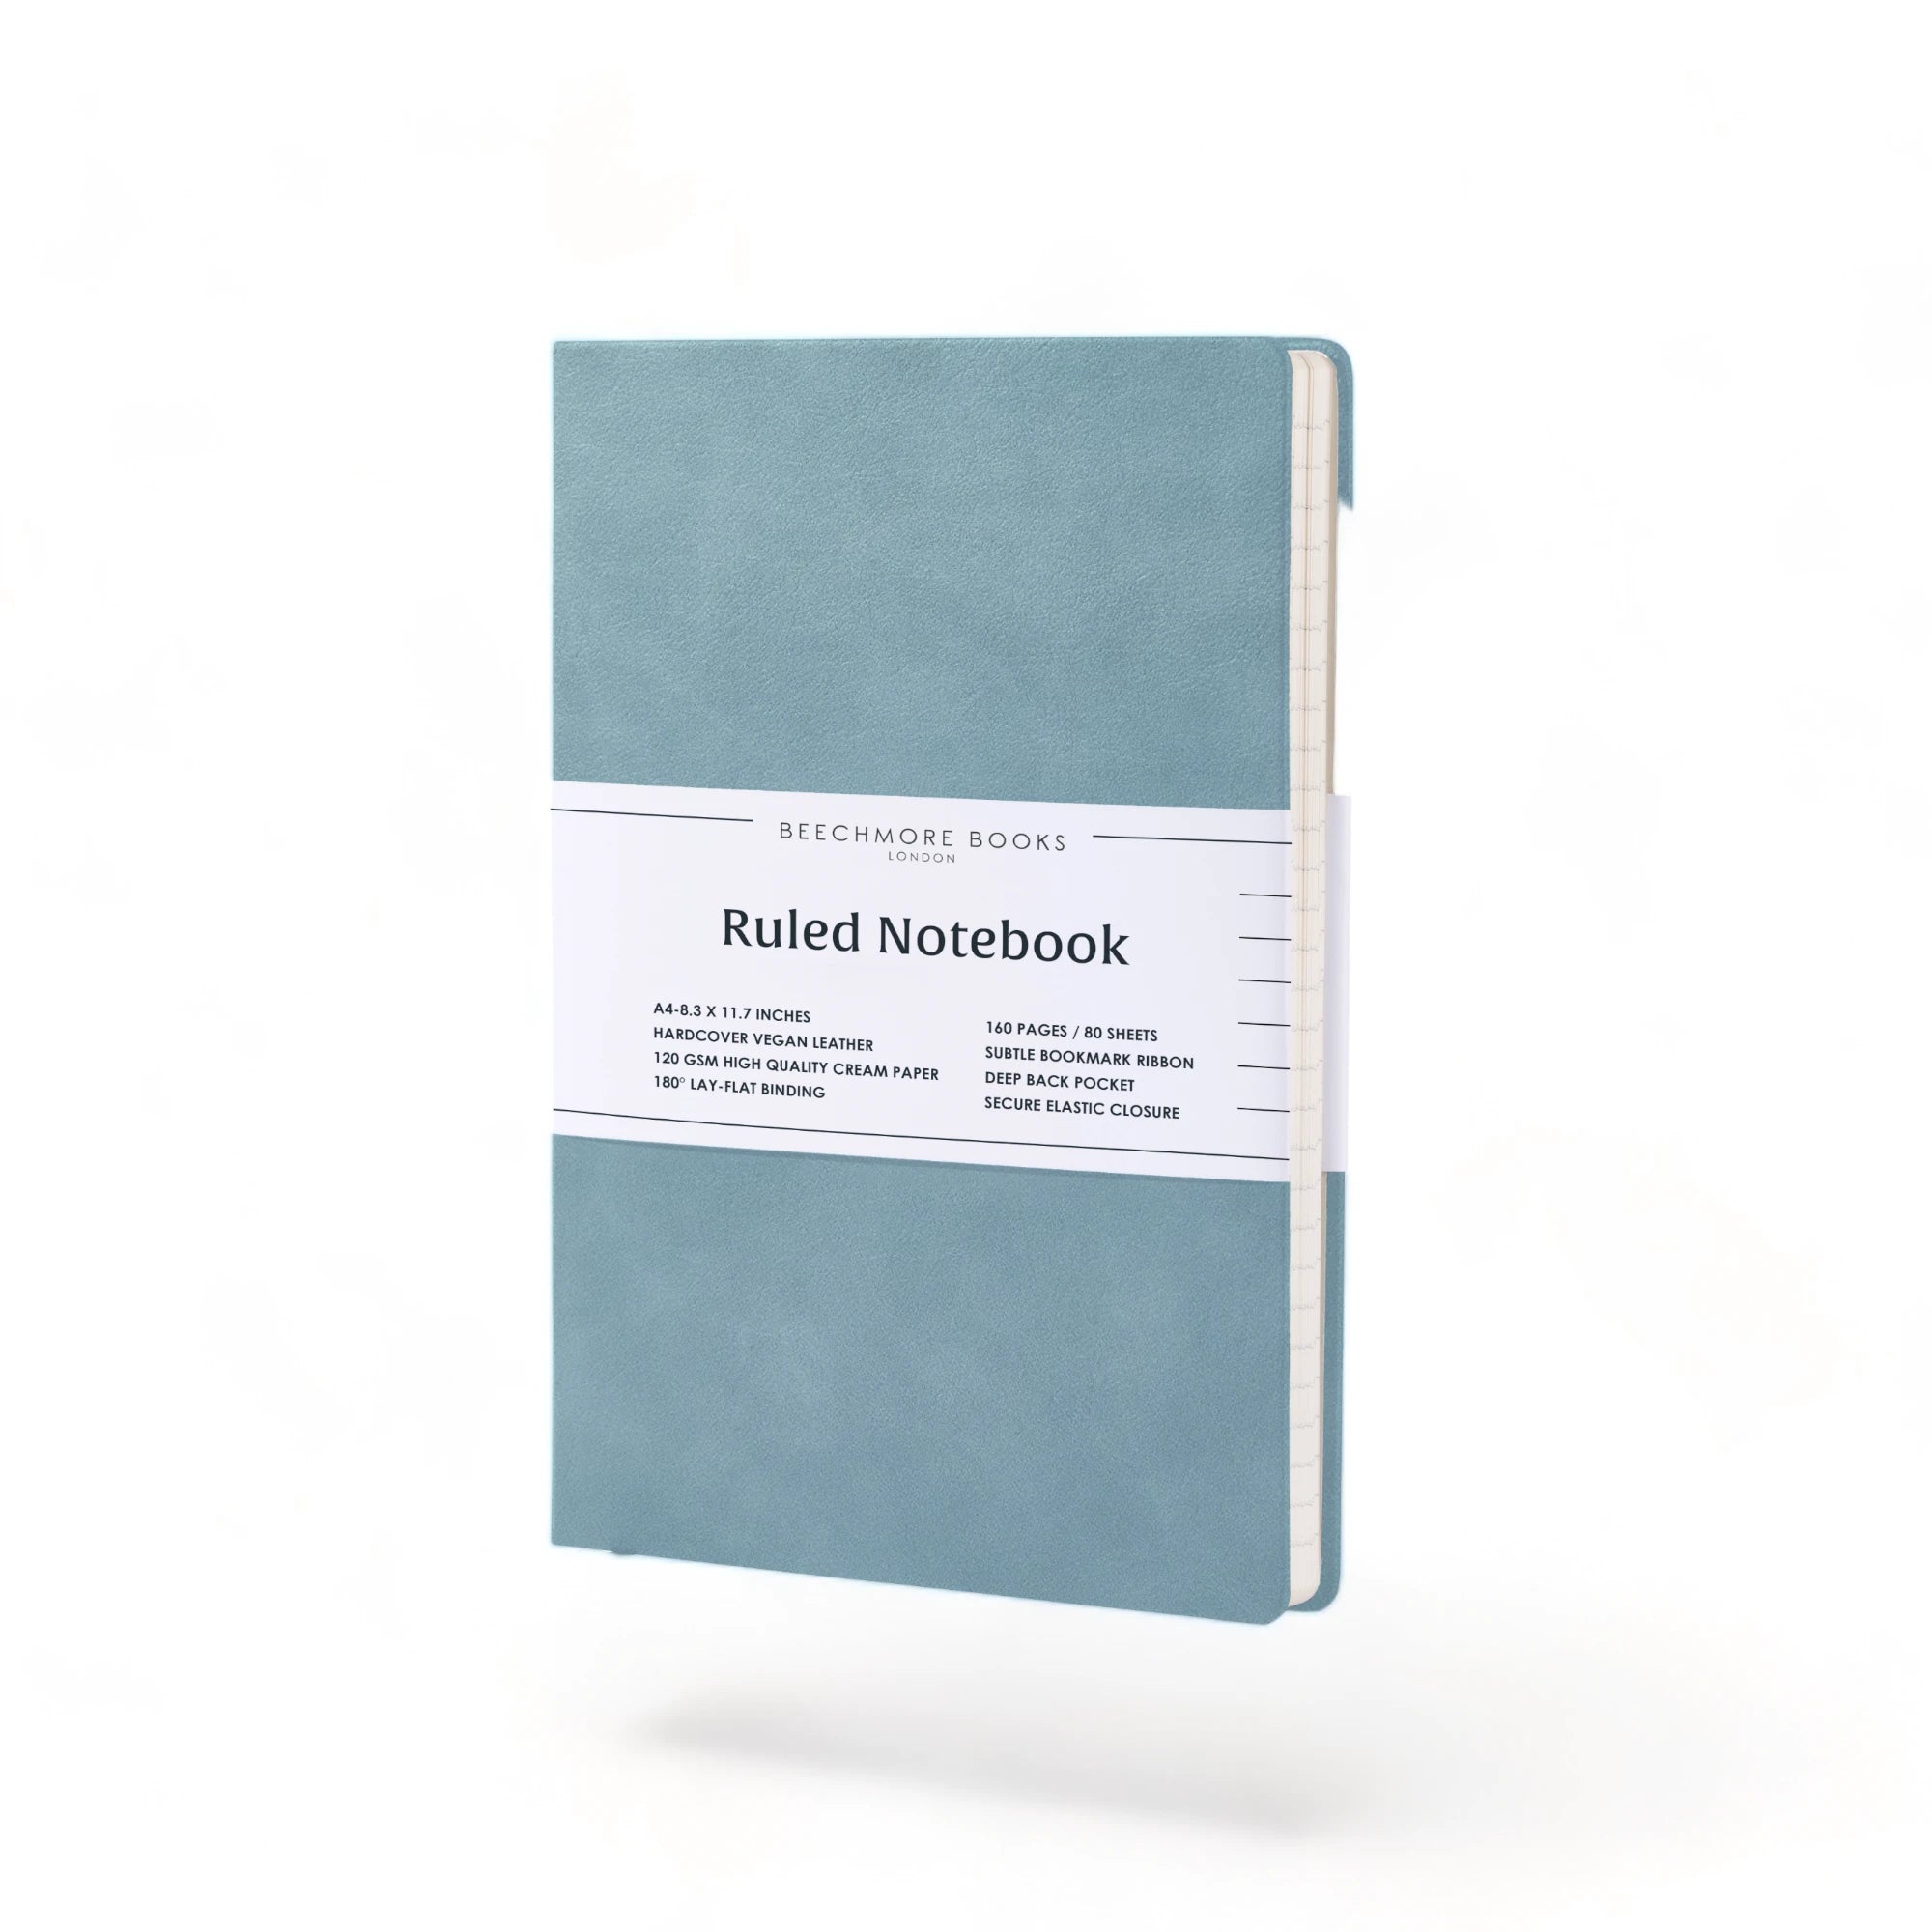 A4 Teal Ruled Journal By Beechmore Books -Photoroom.webp__PID:940d8ae3-a9e4-49ce-8291-75bf56a812c8